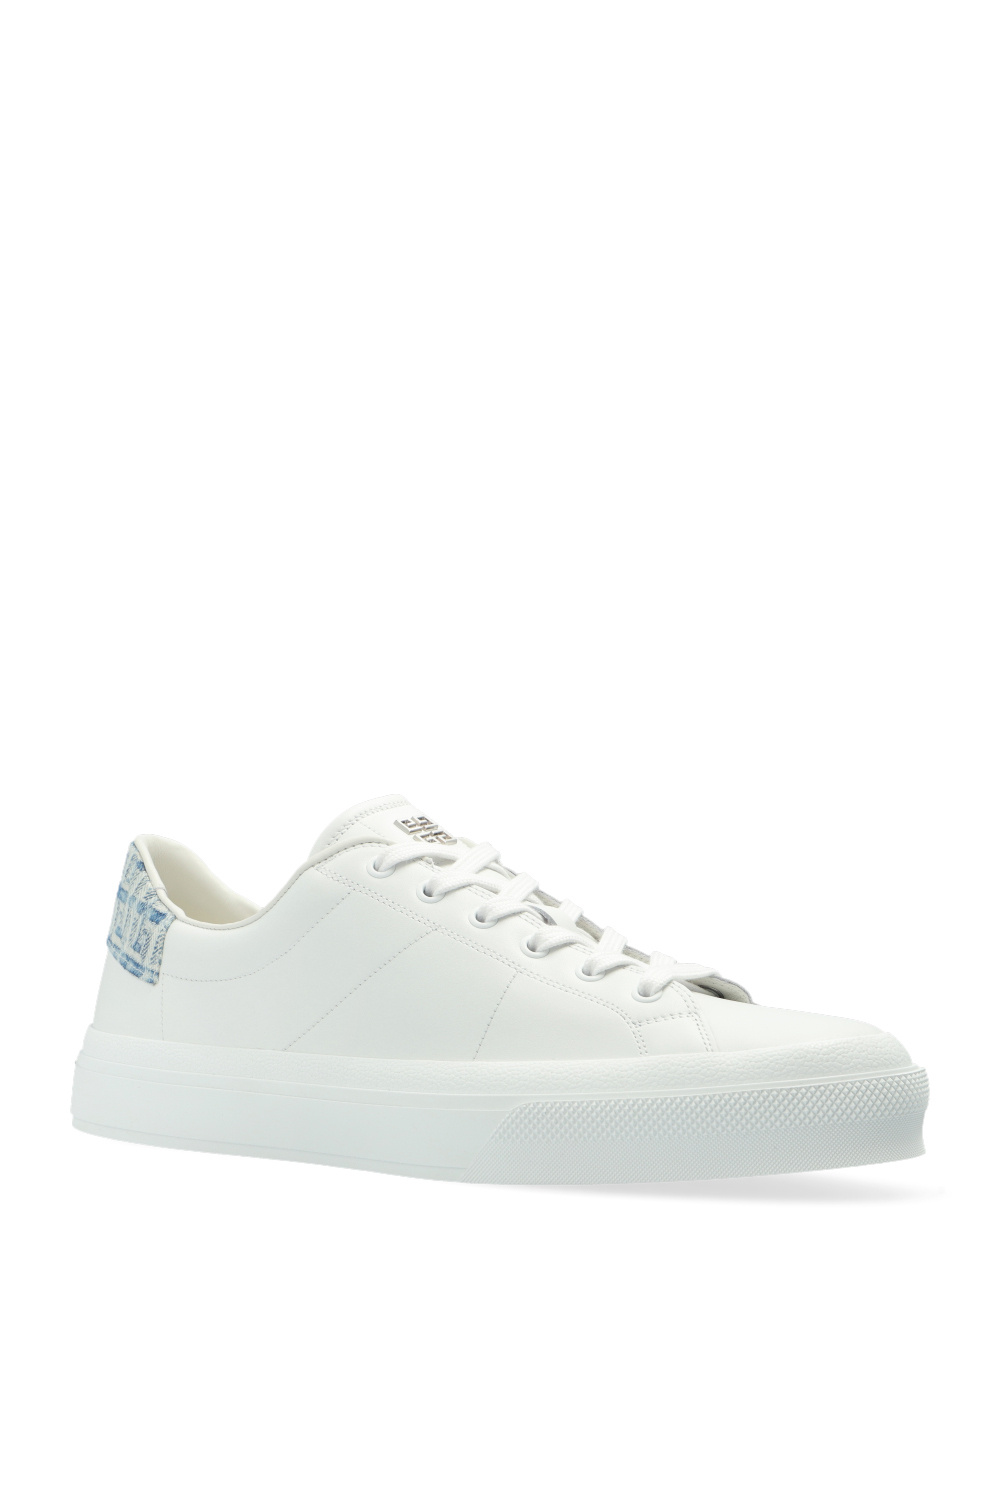 givenchy Pastel ‘City Sport’ leather sneakers